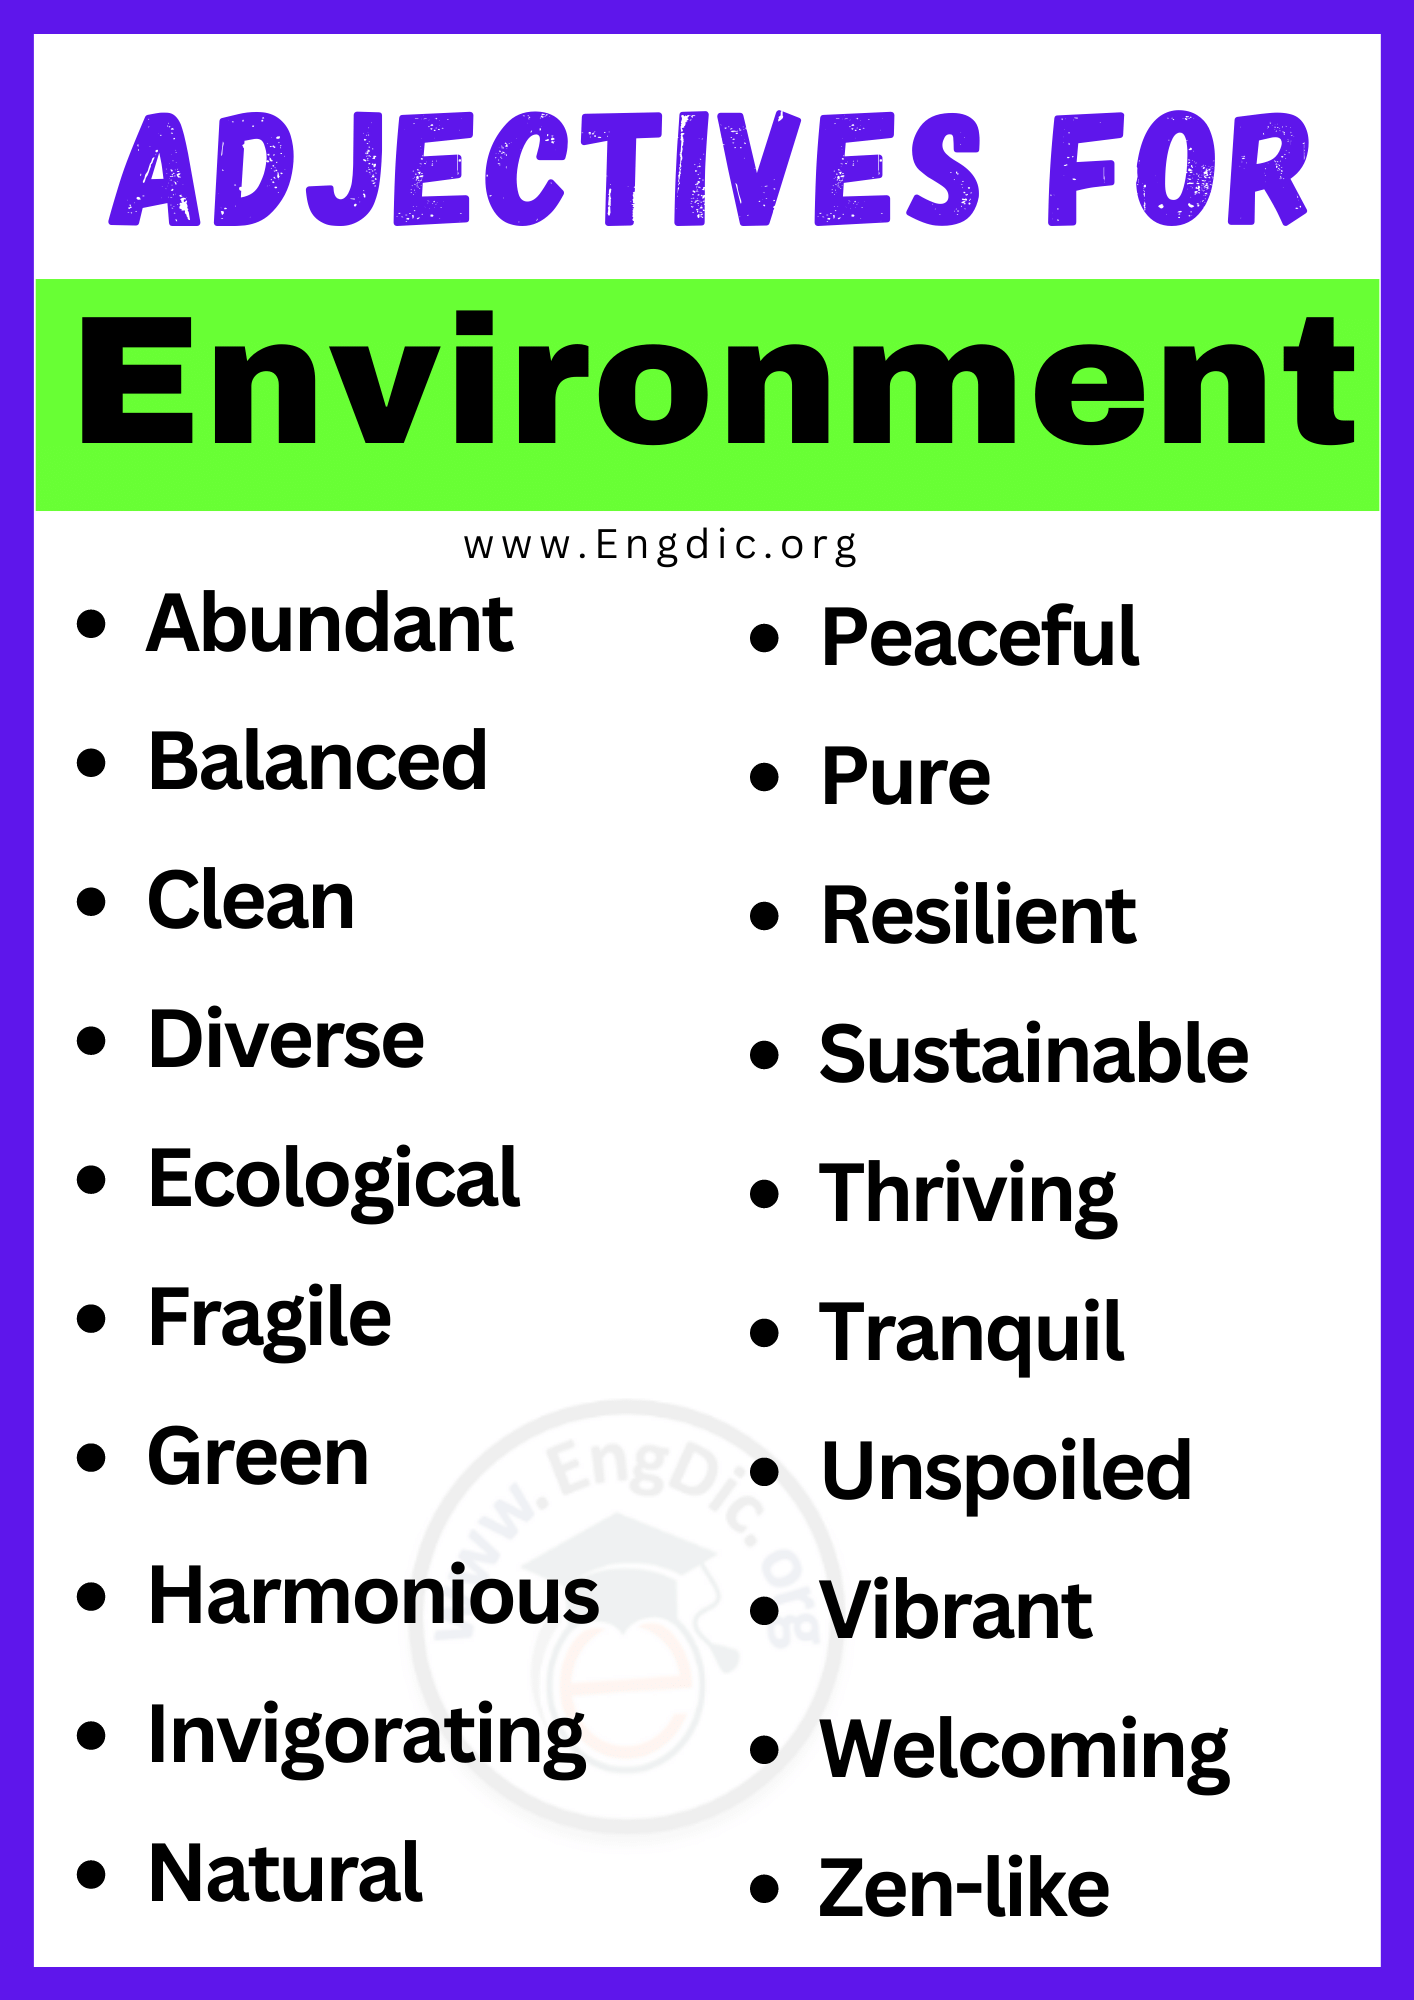 Adjectives for Environmentfor Experience